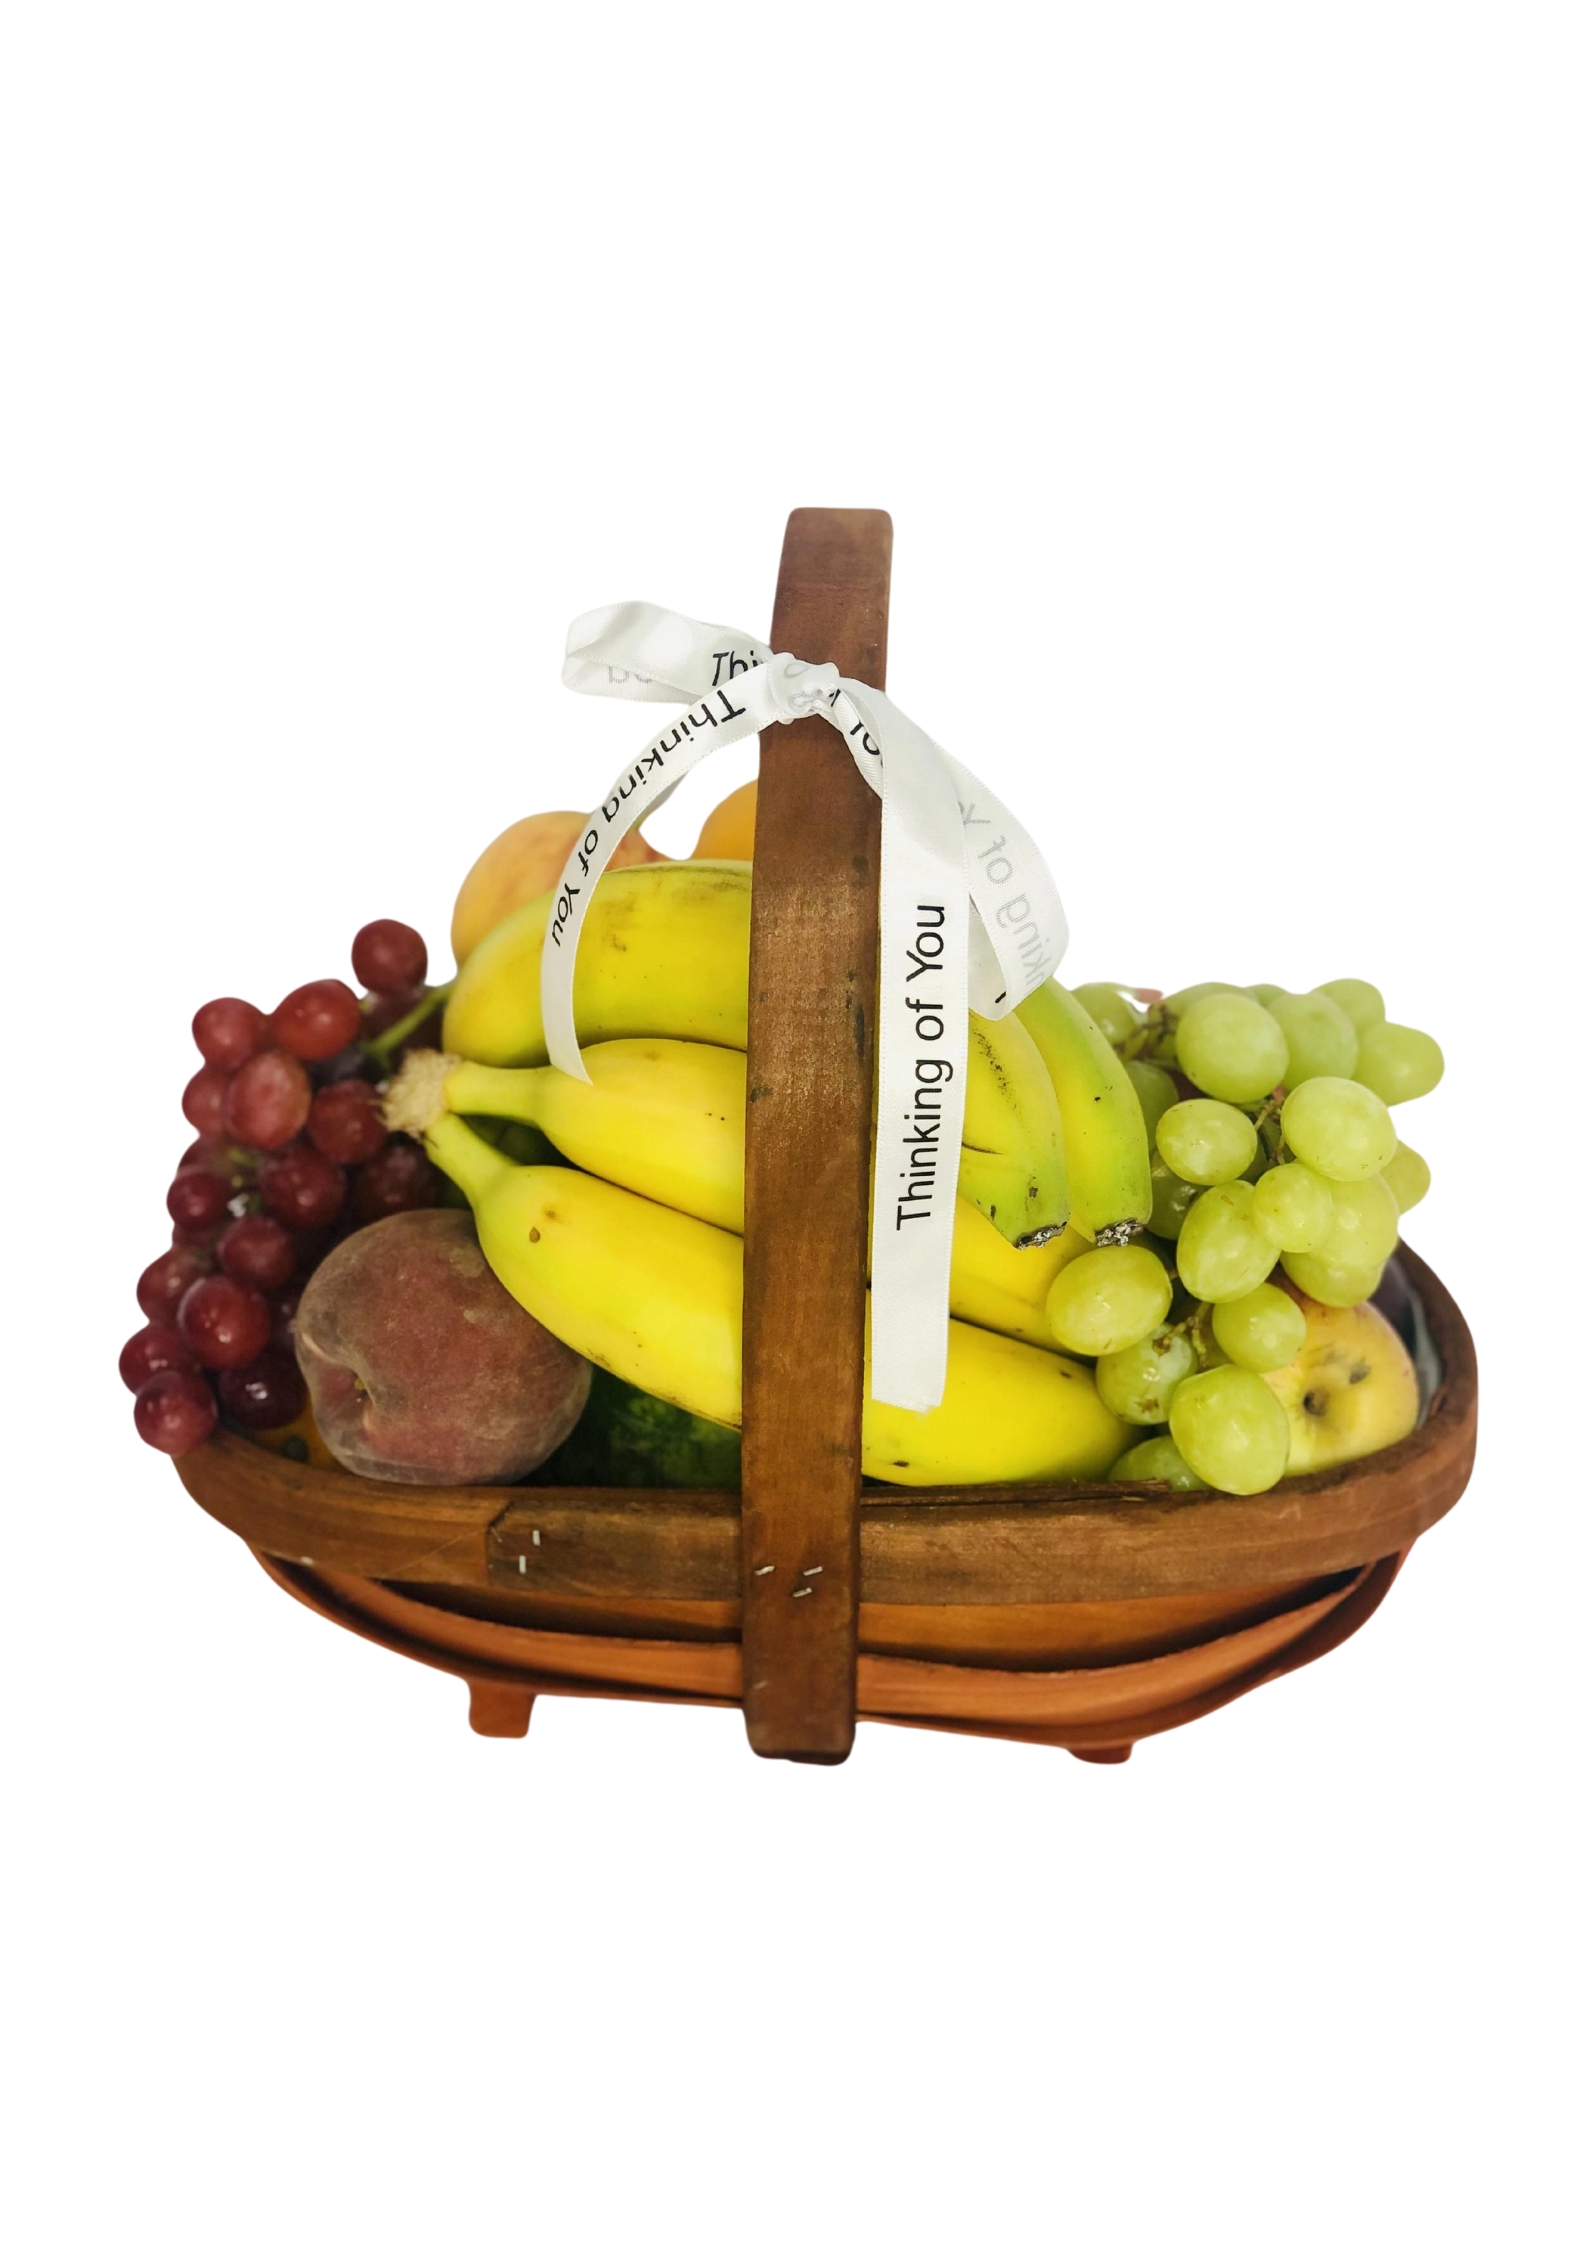 <h2>Basket of Fruit Hand-Delivered</h2>
<br>
<ul>
<li>Seasonal hand-selected fresh fruit</li>
<li>Professionally arranged in an open willow basket</li>
<li>Perfect gift basket for any occasion</li>
<li>To give you the very best occasionally we may make substitutes</li>
<li>For delivery area coverage see below</li>
</ul>
<br>
<h2>Gift Delivery Coverage</h2>
<p>Our shop delivers flowers and gifts to the following Liverpool postcodes L1 L2 L3 L4 L5 L6 L7 L8 L11 L12 L13 L14 L15 L16 L17 L18 L19 L24 L25 L26 L27 L36 L70 If your order is for an area outside of these we can organise delivery for you through our network of florists. We will ask them to make as close as possible to the image but because of the difference in stock and sundry items, it may not be exact.</p>
<br>
<h2>Fresh Fruit Basket</h2>
<p>This generous selection of delicious fresh fruit is presented in an open willow basket. A classic gift for any occasion this selection of fine fruits is sure to raise a smile.</p>
<p>To ensure your gift is of the highest quality contents may vary according to the season.</p>
<p>A fruit basket is a lovely alternative to sending flowers and can be sent for a lady or a gentleman to let them know you are thinking of them.</p>
<br>
<h2>Online Gift Ordering | Online Gift Delivery</h2>
<p>Through this website you can order 24 hours, Booker Gifts and Gifts Liverpool have put together this carefully selected range of Flowers, Gifts and Finishing Touches to make Gift ordering as easy as possible. This means even if you do not live in Liverpool we make it easy for you to see what you are getting when buying for delivery in Liverpool.</p>
<br>
<h2>Liverpool Flower and Gift Delivery</h2>
<p>We are open 7 days a week and offer advanced booking flower delivery, same-day flower delivery, Guaranteed AM Flower Delivery and also offer Sunday Flower Delivery.</p>
<p>Our florists Deliver in Liverpool and can provide flowers for you in Liverpool, Merseyside. And through our network of florists can organise flower deliveries for you nationwide.</p>
<br>
<h2>Beautiful Gifts Delivered | Best Florist in Liverpool</h2>
<p>Having been nominated the Best Florist in Liverpool by the independent Three Best Rated for the 5th year running you can feel secure with us</p>
<p>You can trust Booker Gifts and Gifts to deliver the very best for you.</p>
<br>
<h2>5 Star Google Review</h2>
<p><em>So Pleased with the product and service received. I am working away currently, so ordered online, and after my own misunderstanding with online payment, I contacted the florist directly to query. Gemma was very prompt and helpful, and my flowers were arranged easily. They arrived this morning and were as impactful as the pictures on the website, and the quality of the flowers and the arrangement were excellent. Great Work! David Welsh</em></p>
<br>